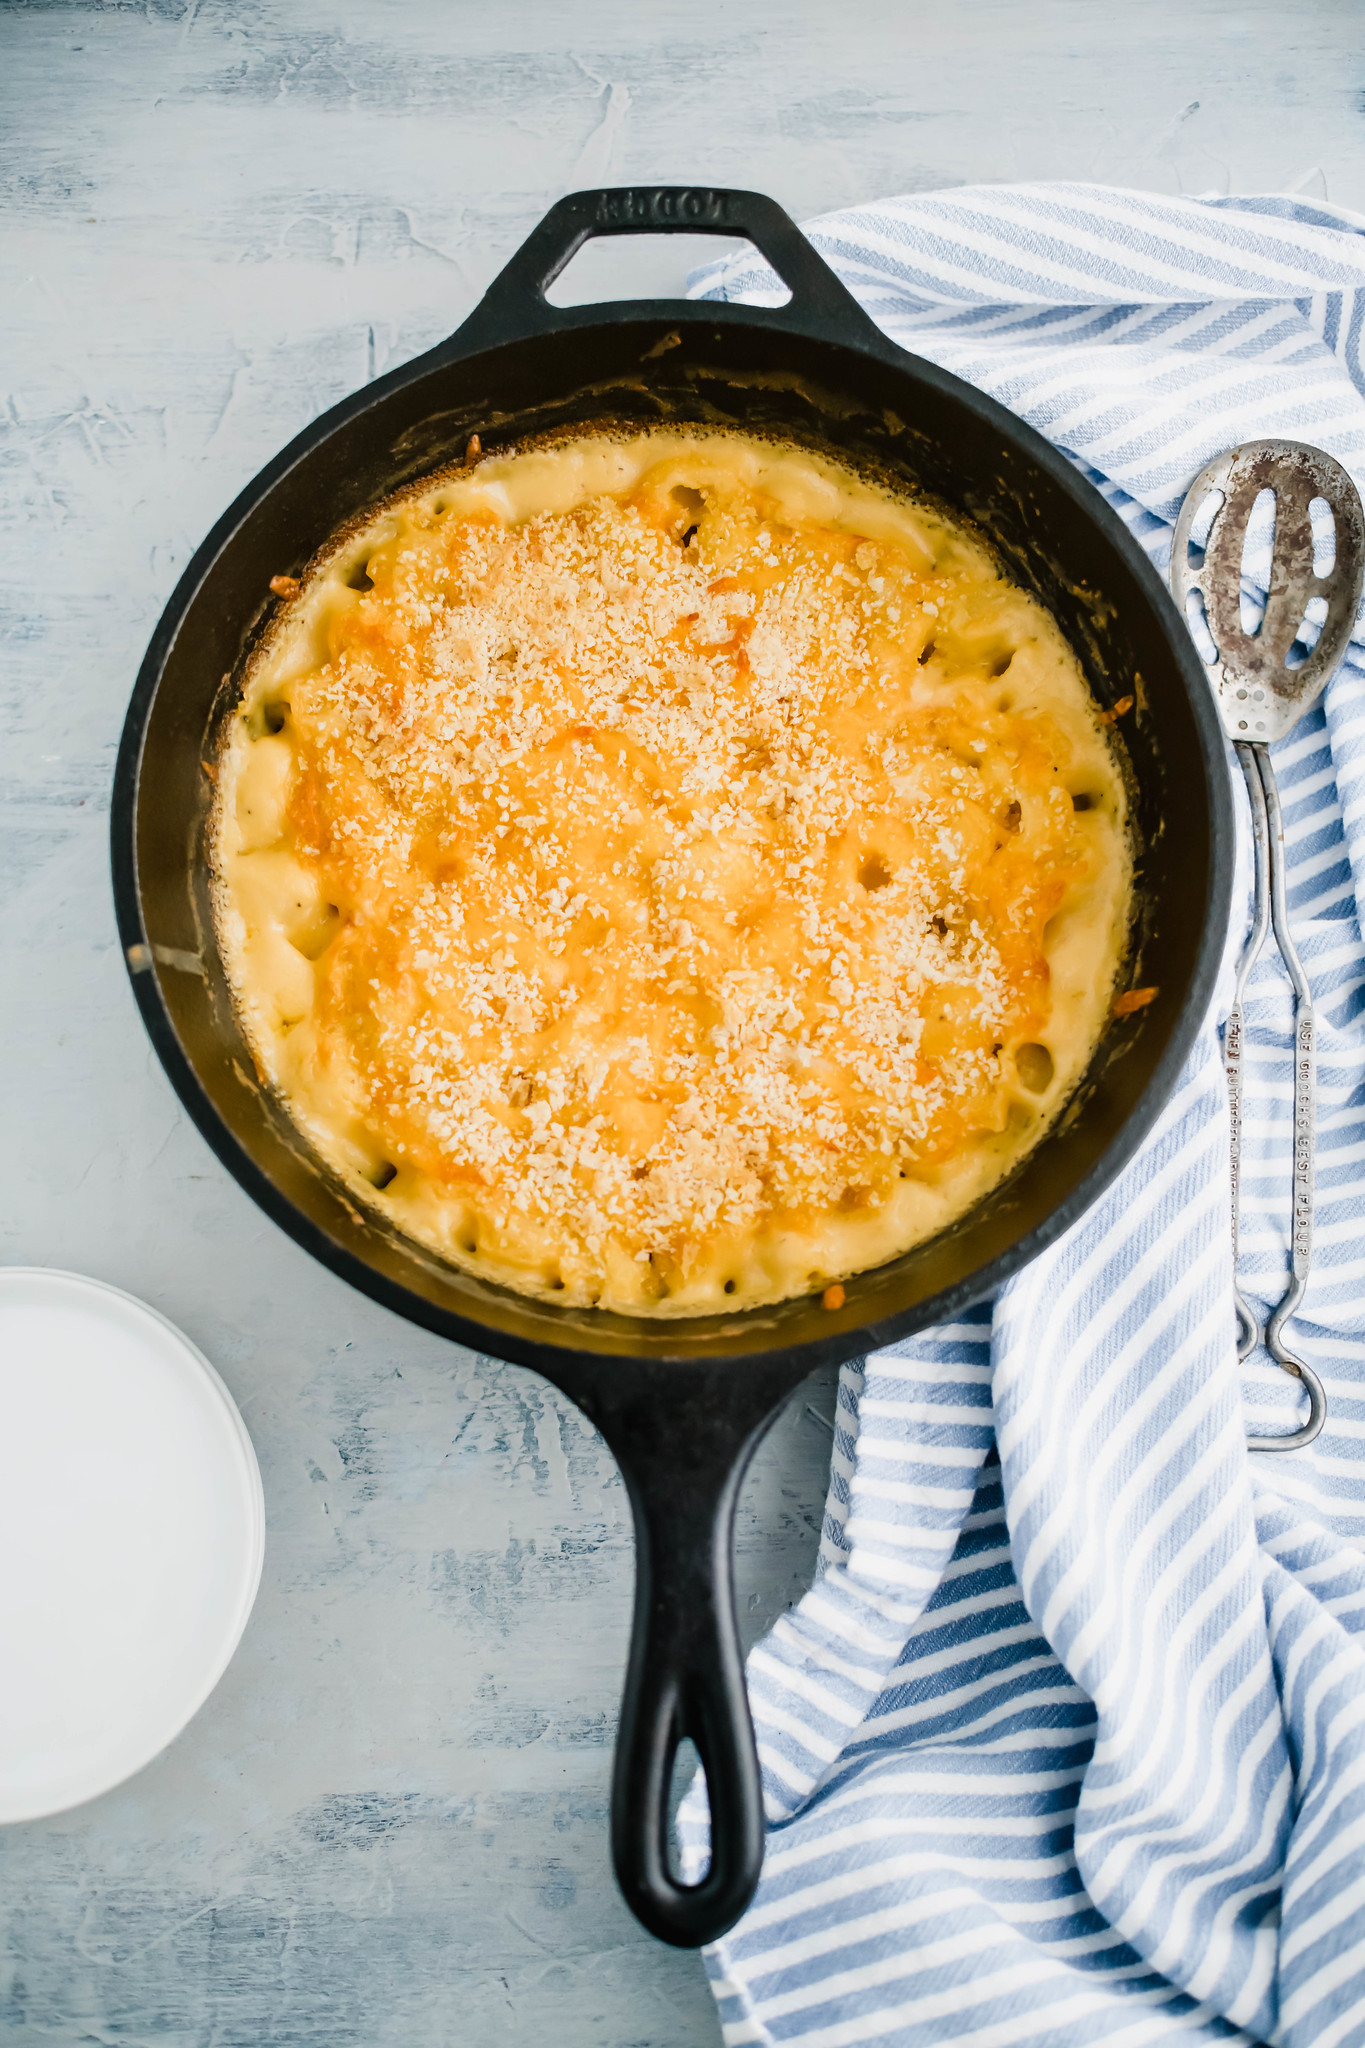 Cast iron skillet baked macaroni and cheese. Cloth napkin and large serving spoon to the right side. 